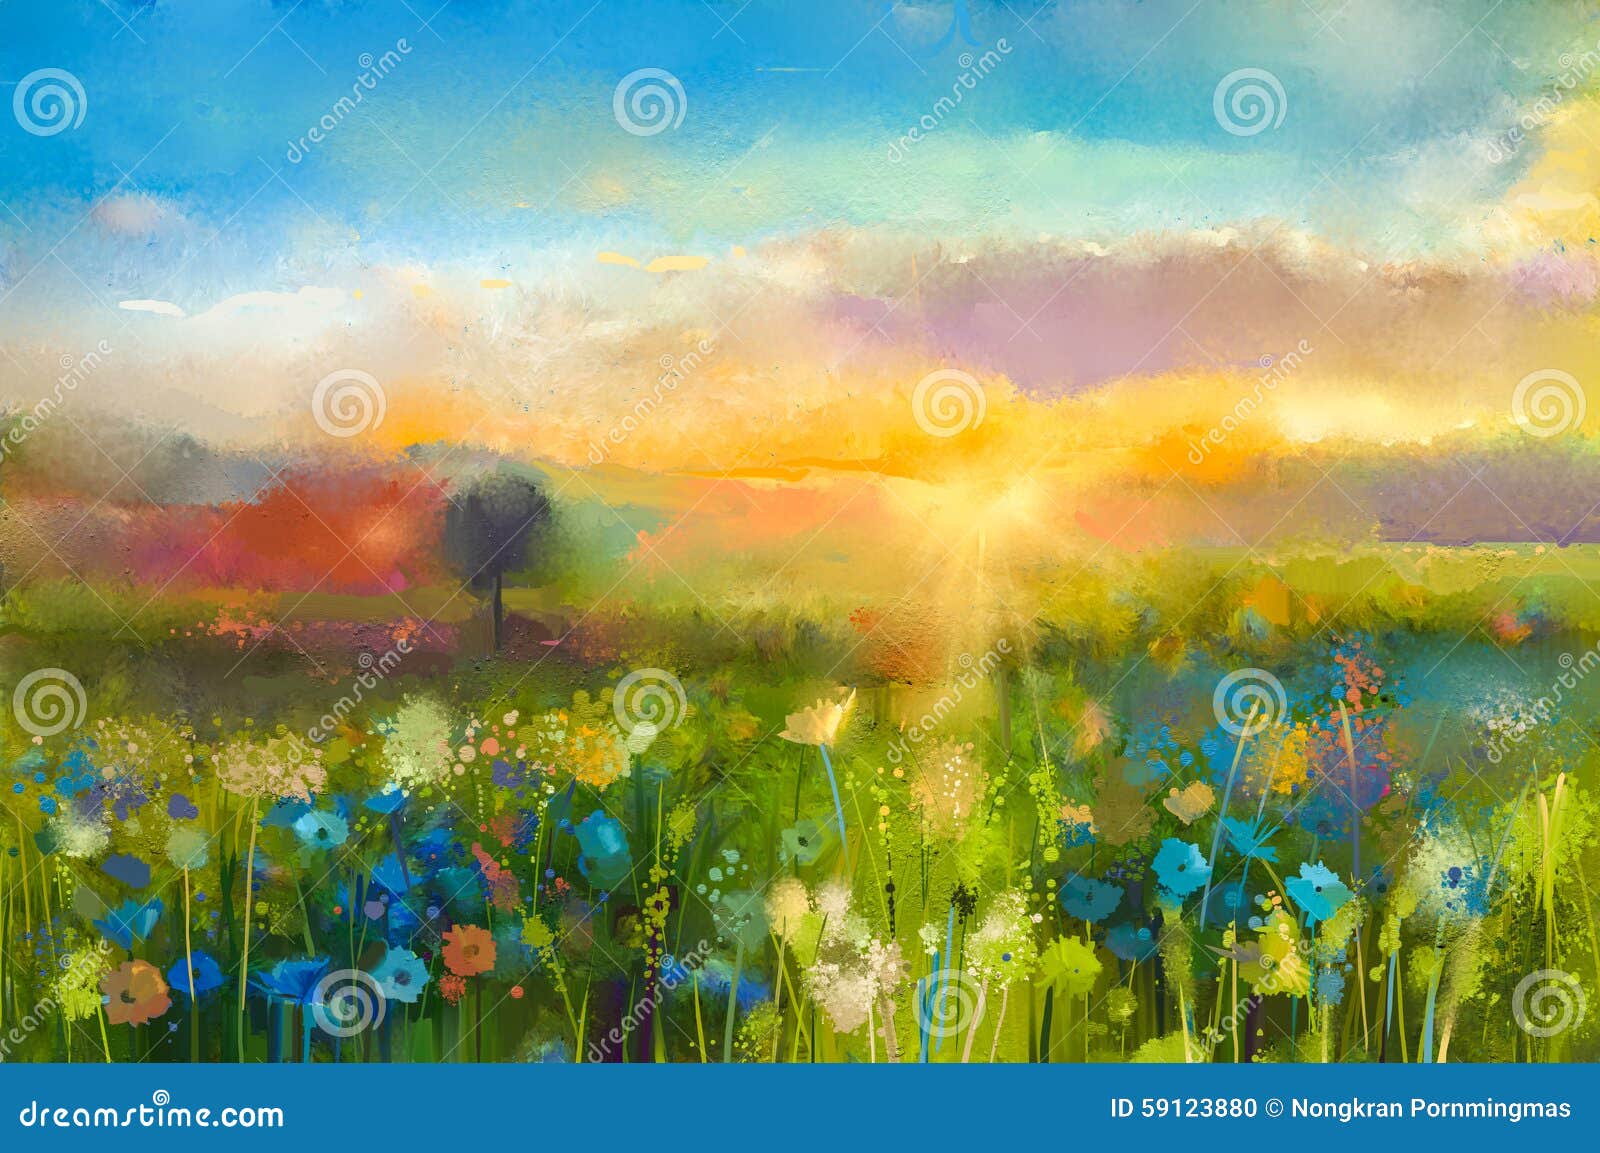 oil painting sunset meadow landscape with wildflower